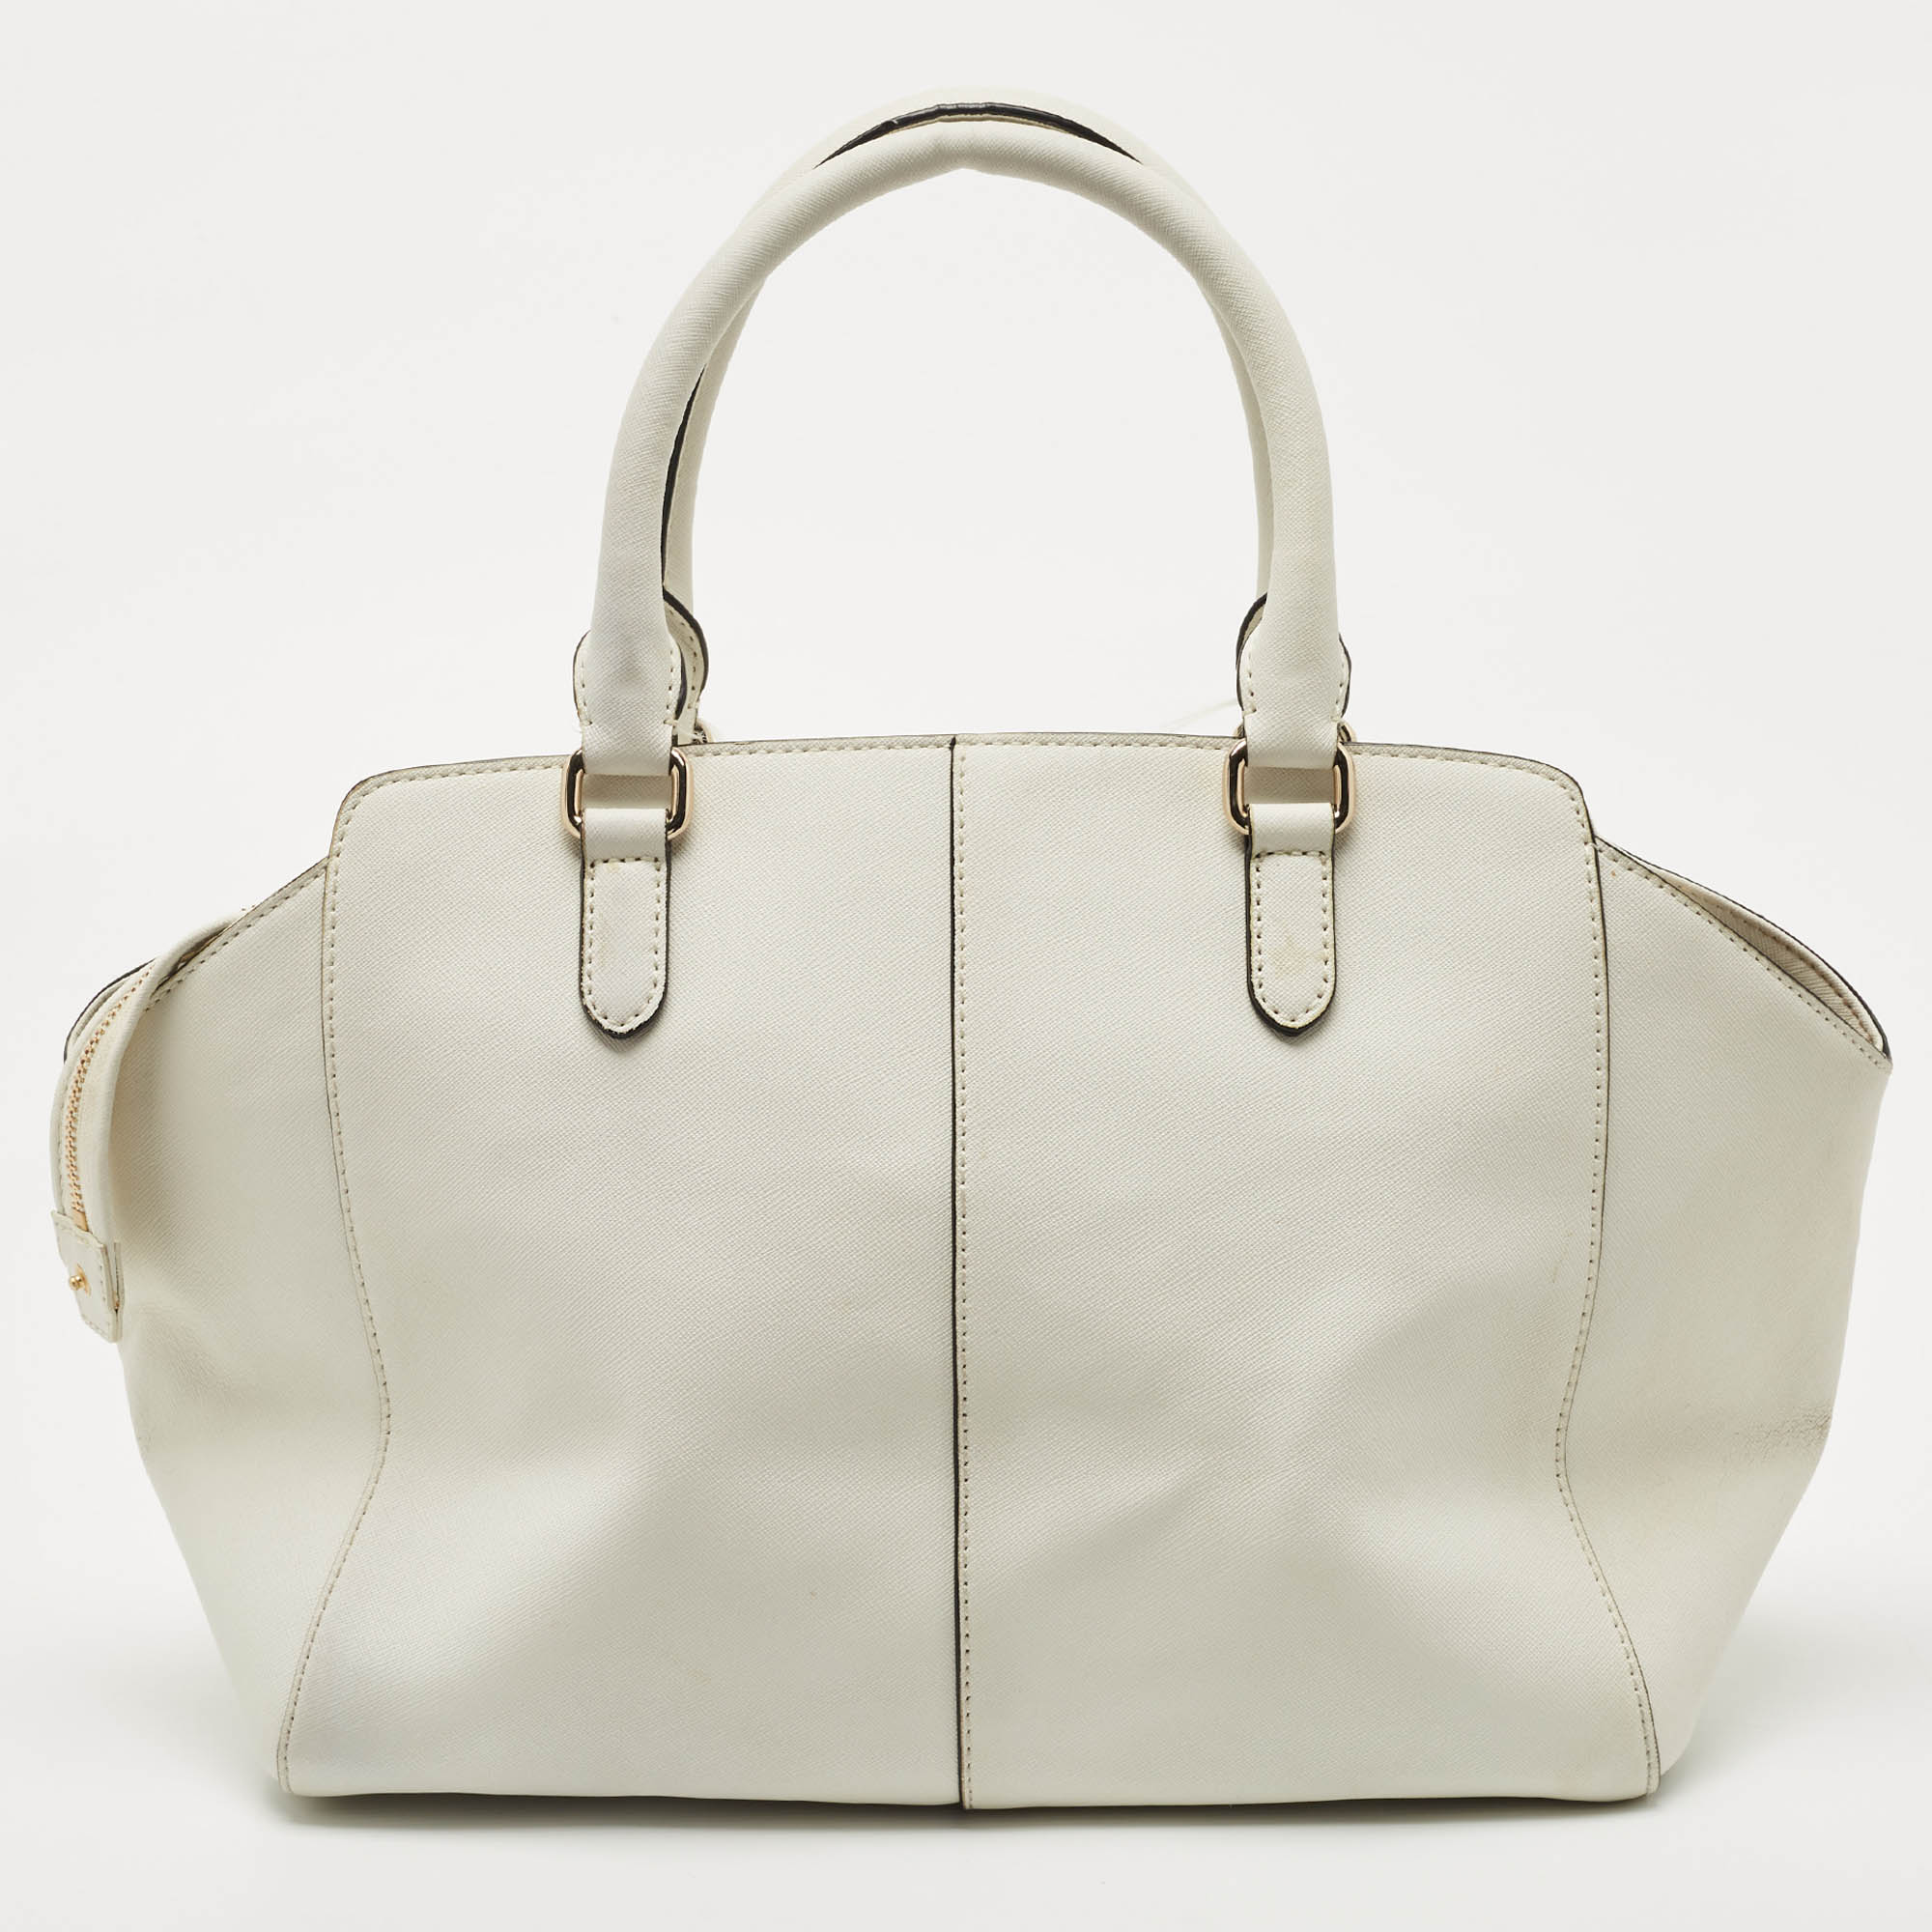 DKNY White Saffiano Leather Bryant Park Tote